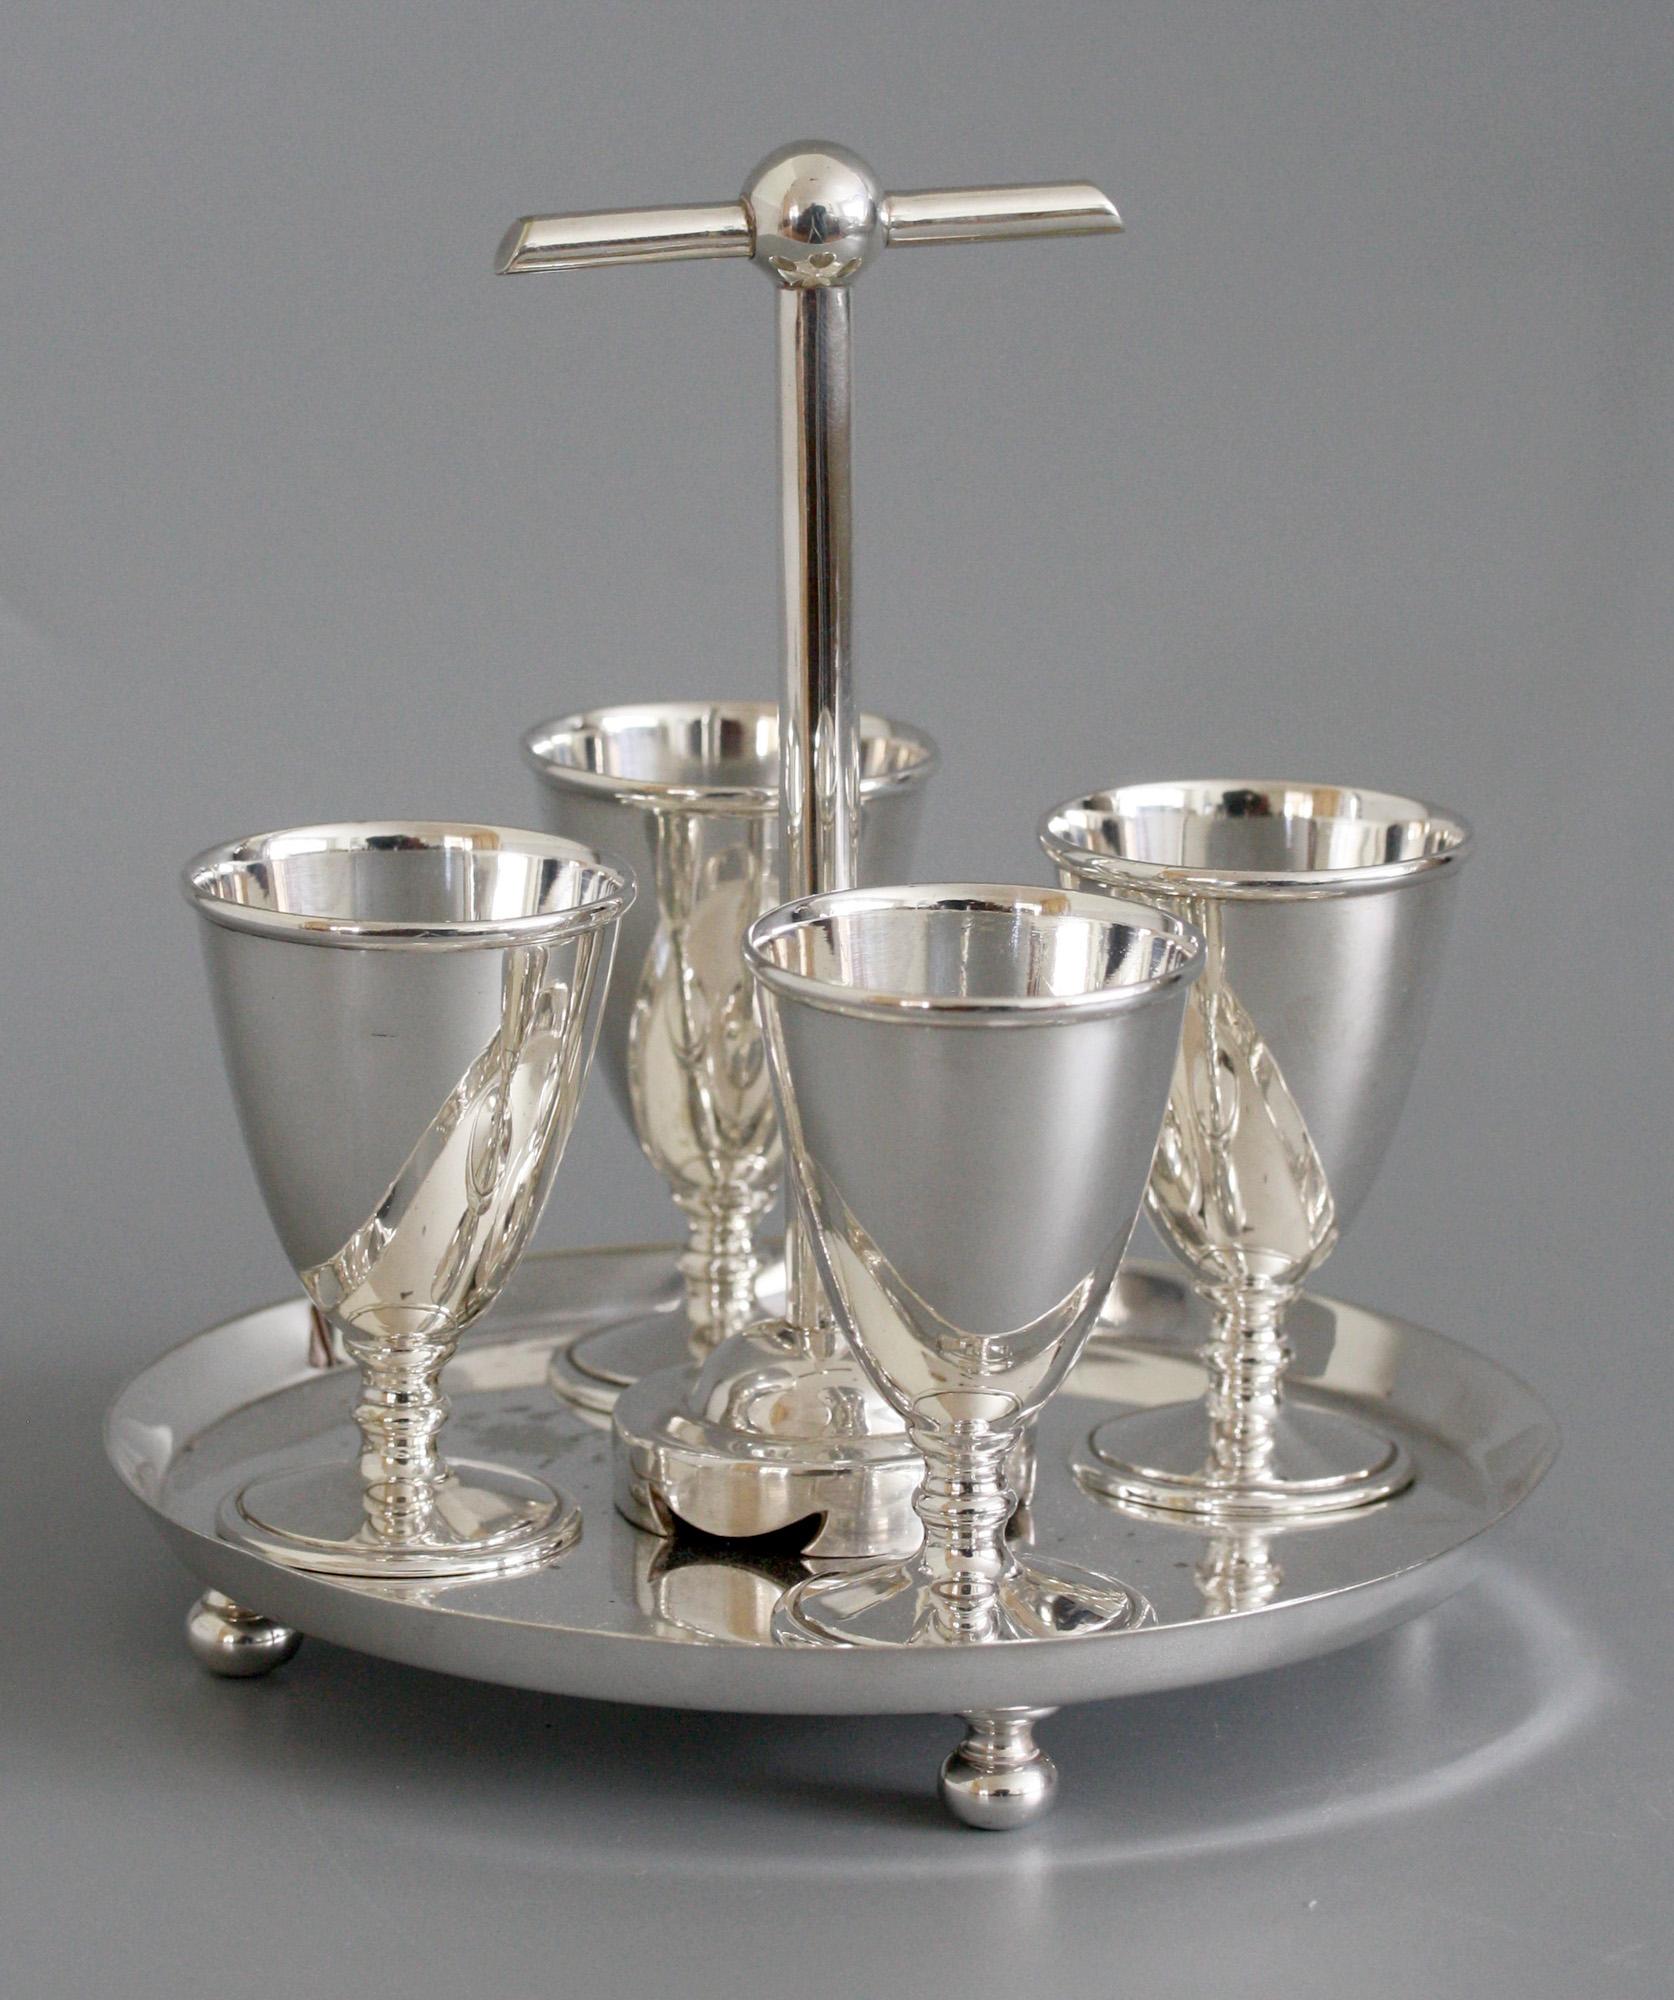 Hukin & Heath Silver Plated Four Eggcup Stand Designed by Christopher Dresser 5